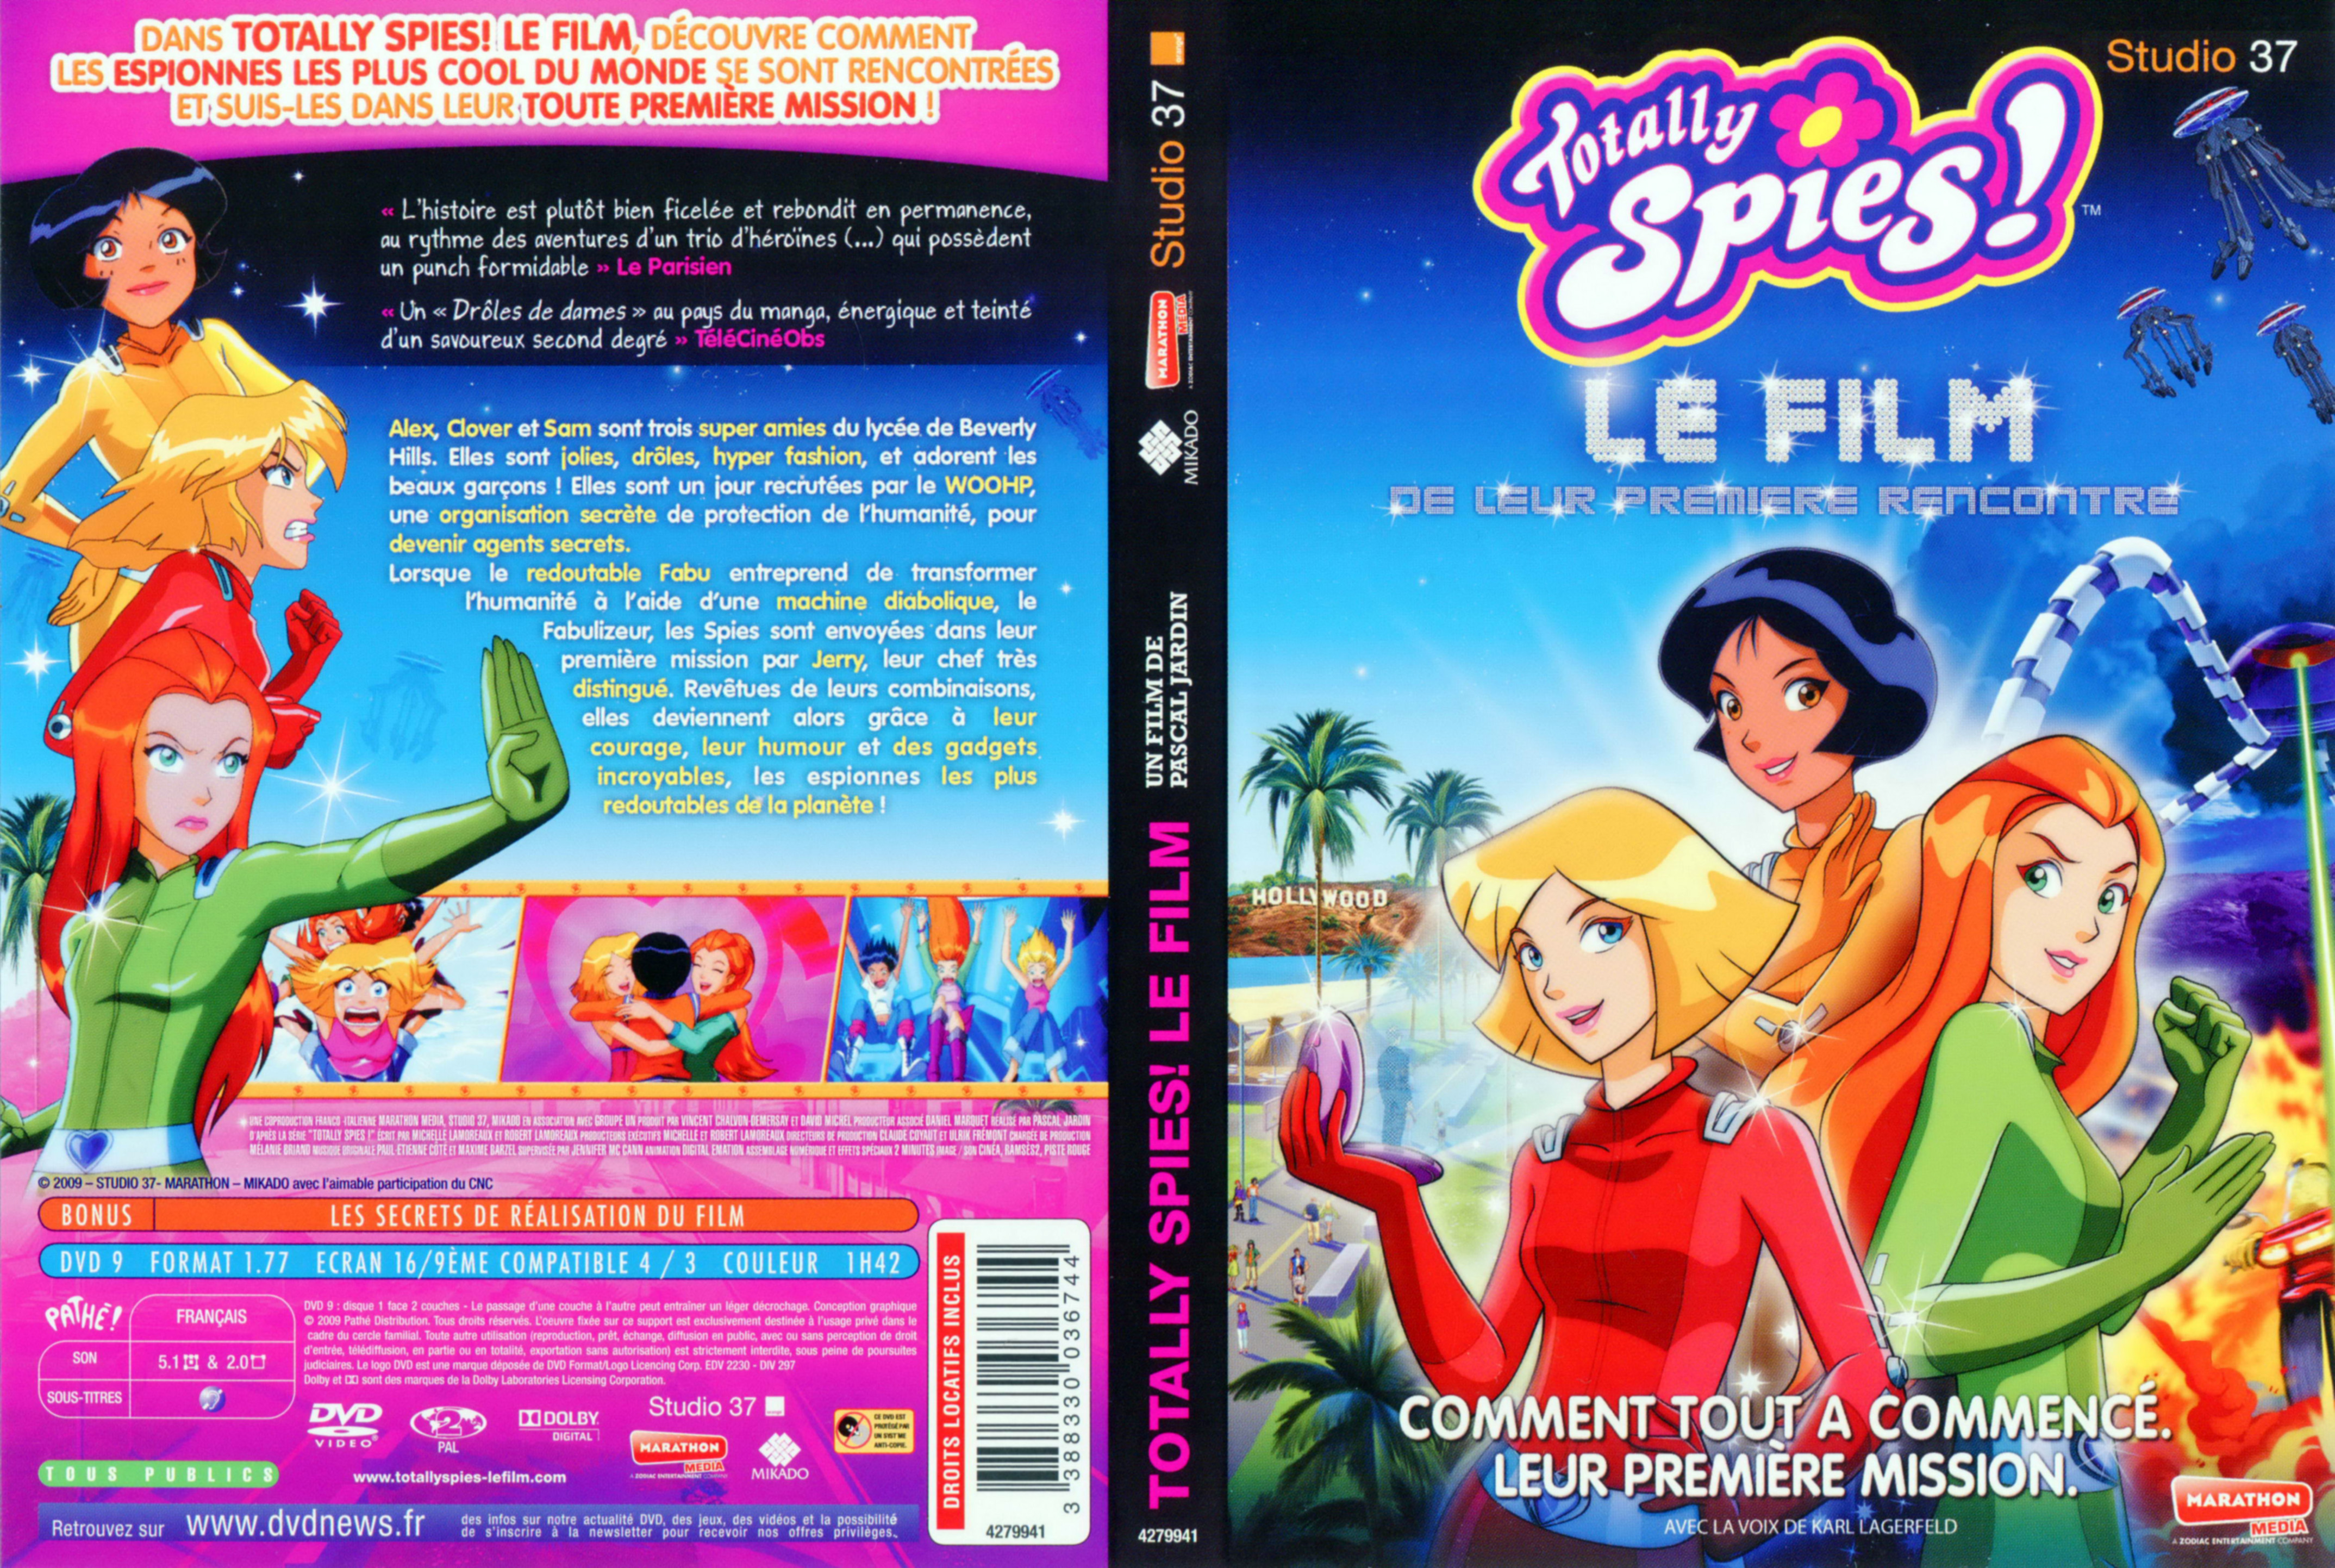 Jaquette DVD Totally spies le film